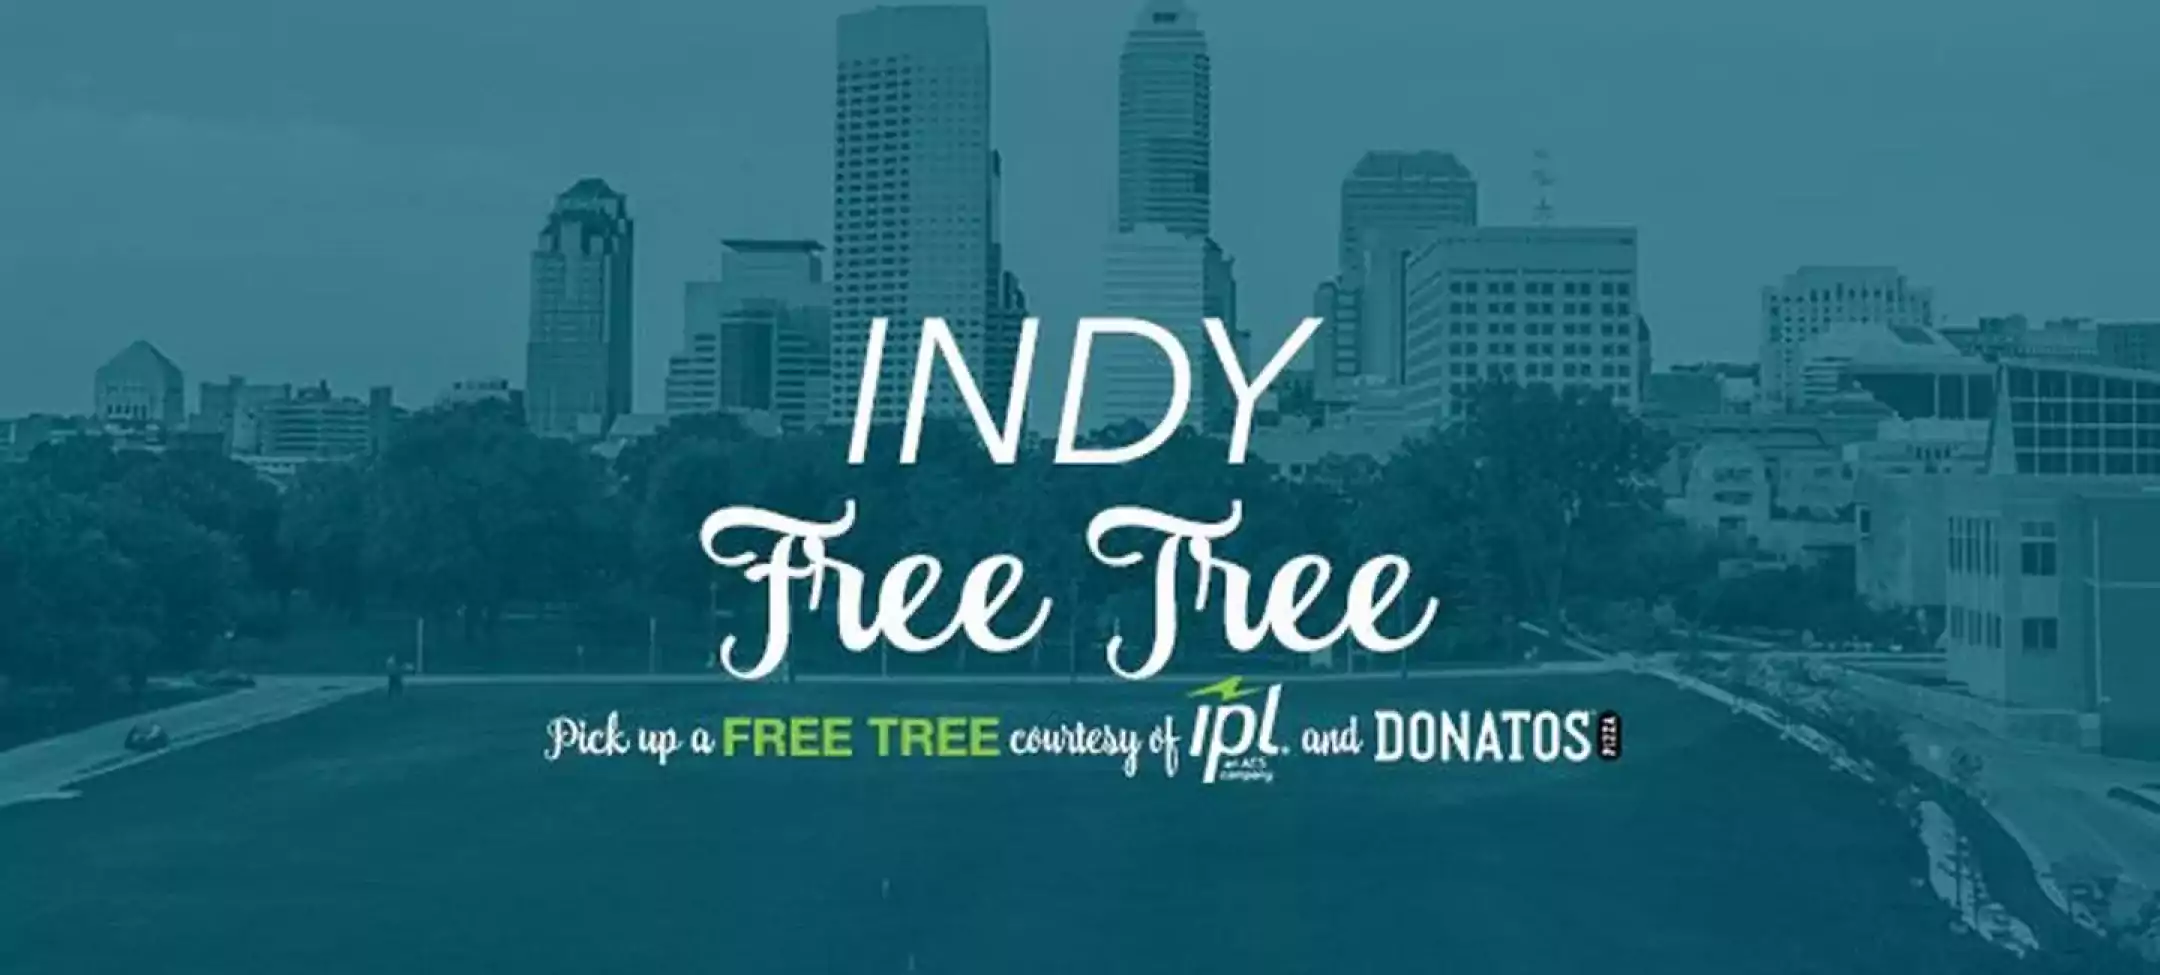 Indy Free Tree Event